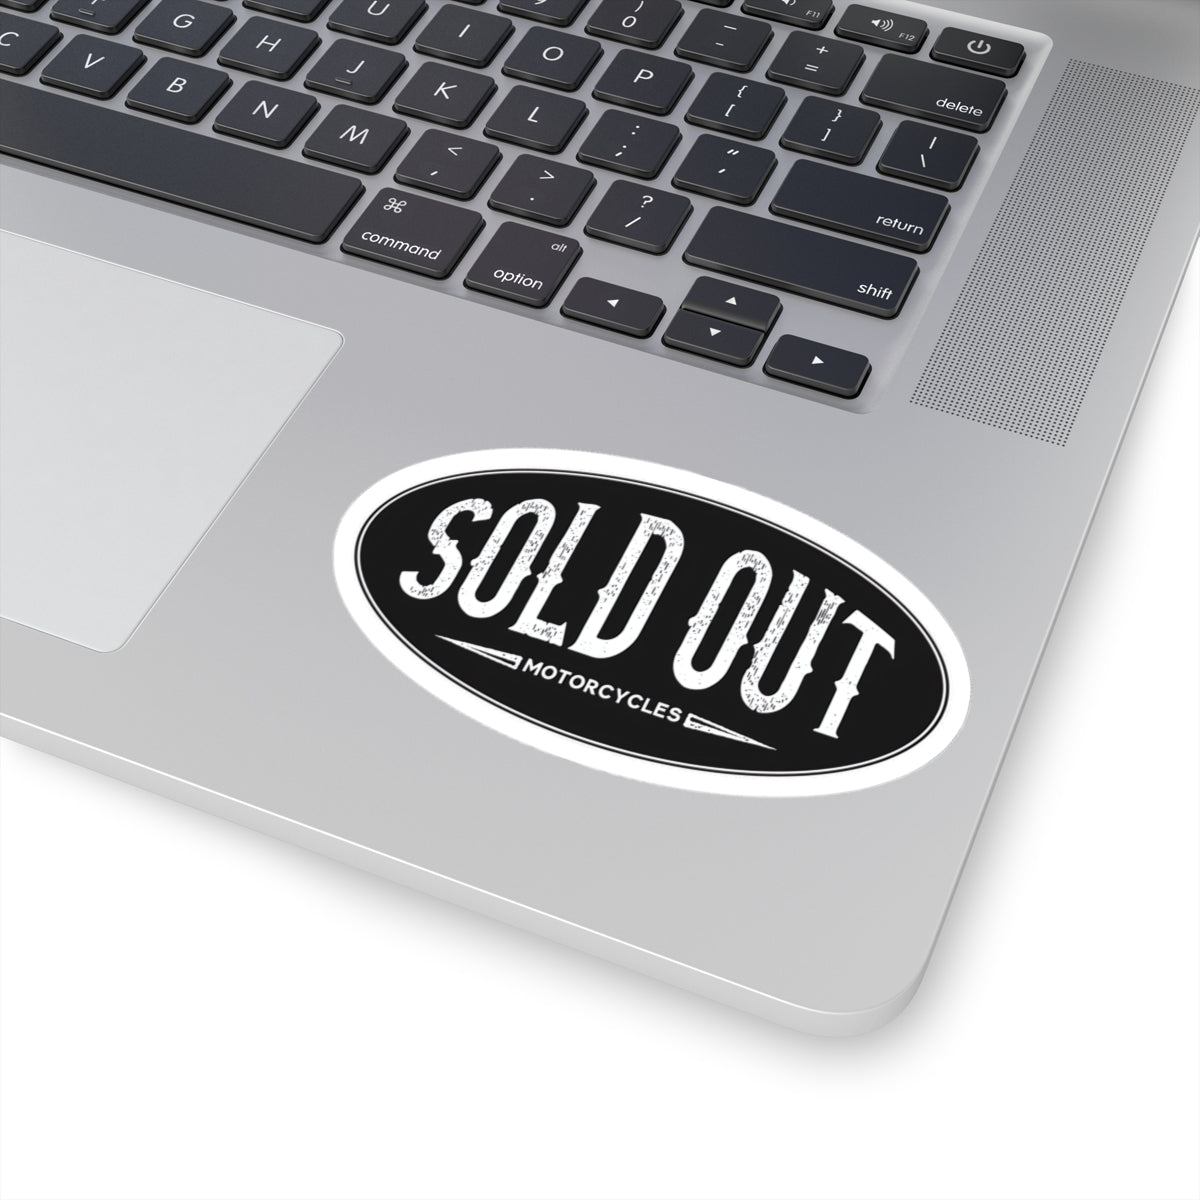 Sold Out Motorcycles Sticker